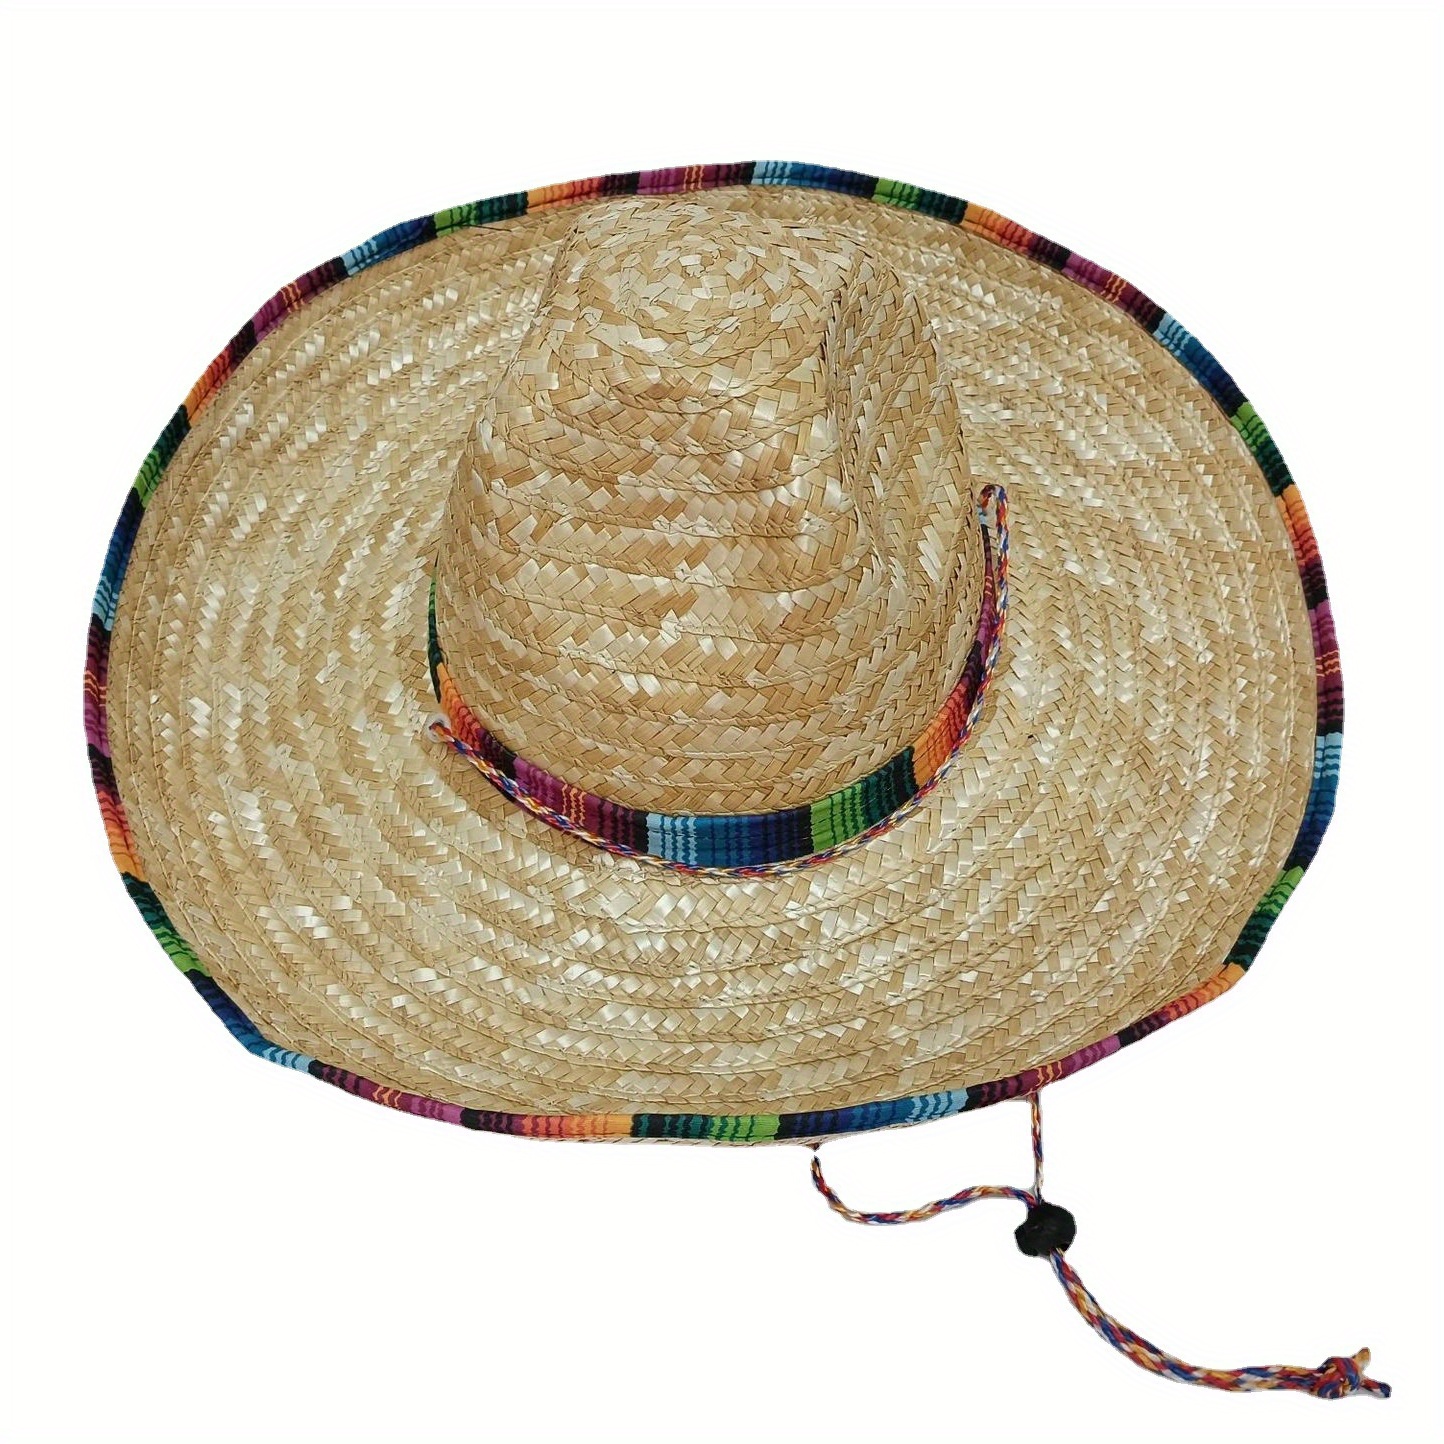 4Pack Mexican Sombrero Hat Adults with Serape Trim, 18 Wide Authentic  Sombrero for Cinco de Mayo, Straw Sombrero with Serape Band, Adult Mexican  Serape Costume 